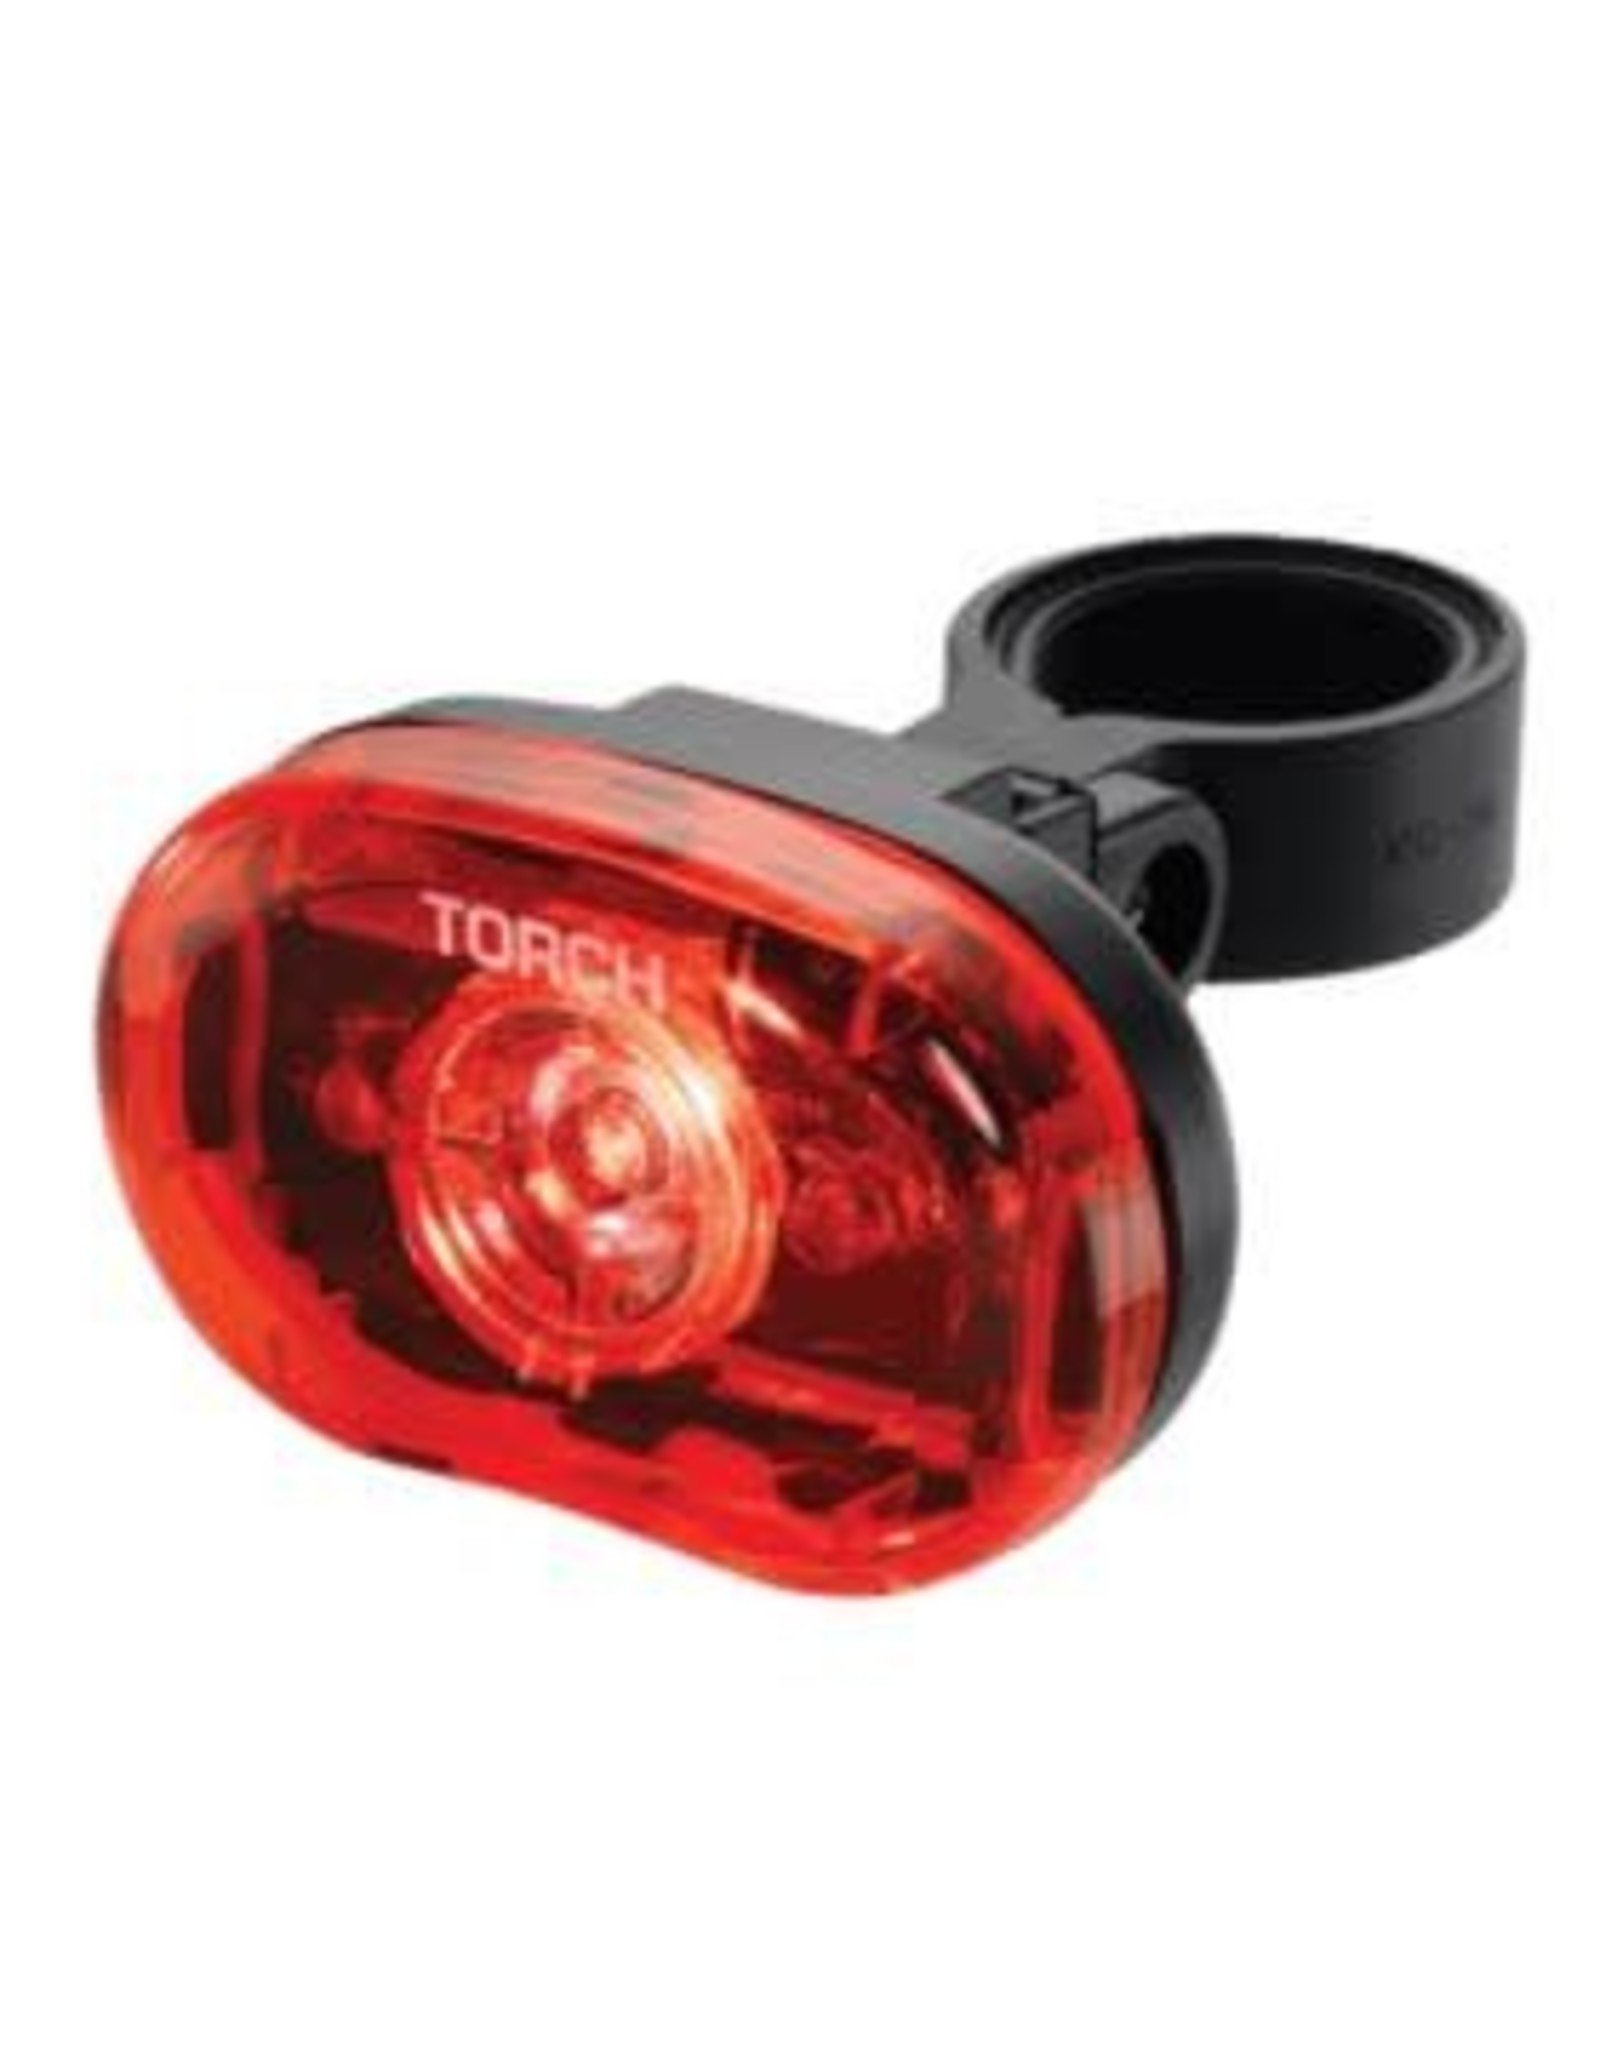 Torch Tailbright 0.5W